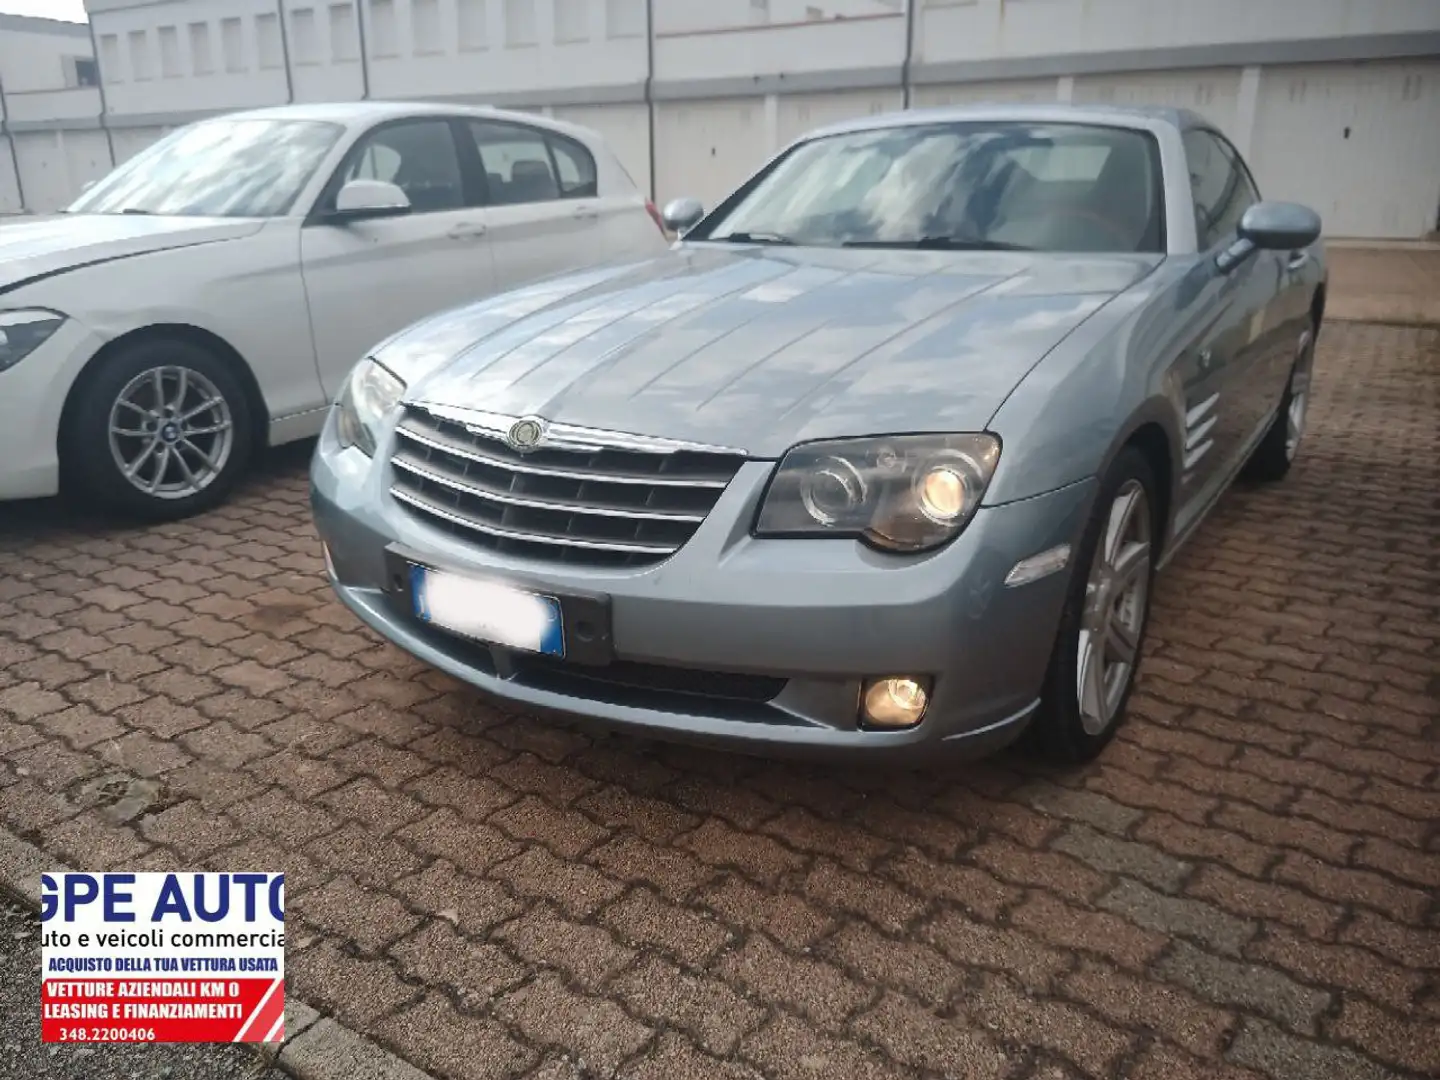 Chrysler Crossfire Coupe 3.2 V6 18v Limited - iscritta ASI Grijs - 1